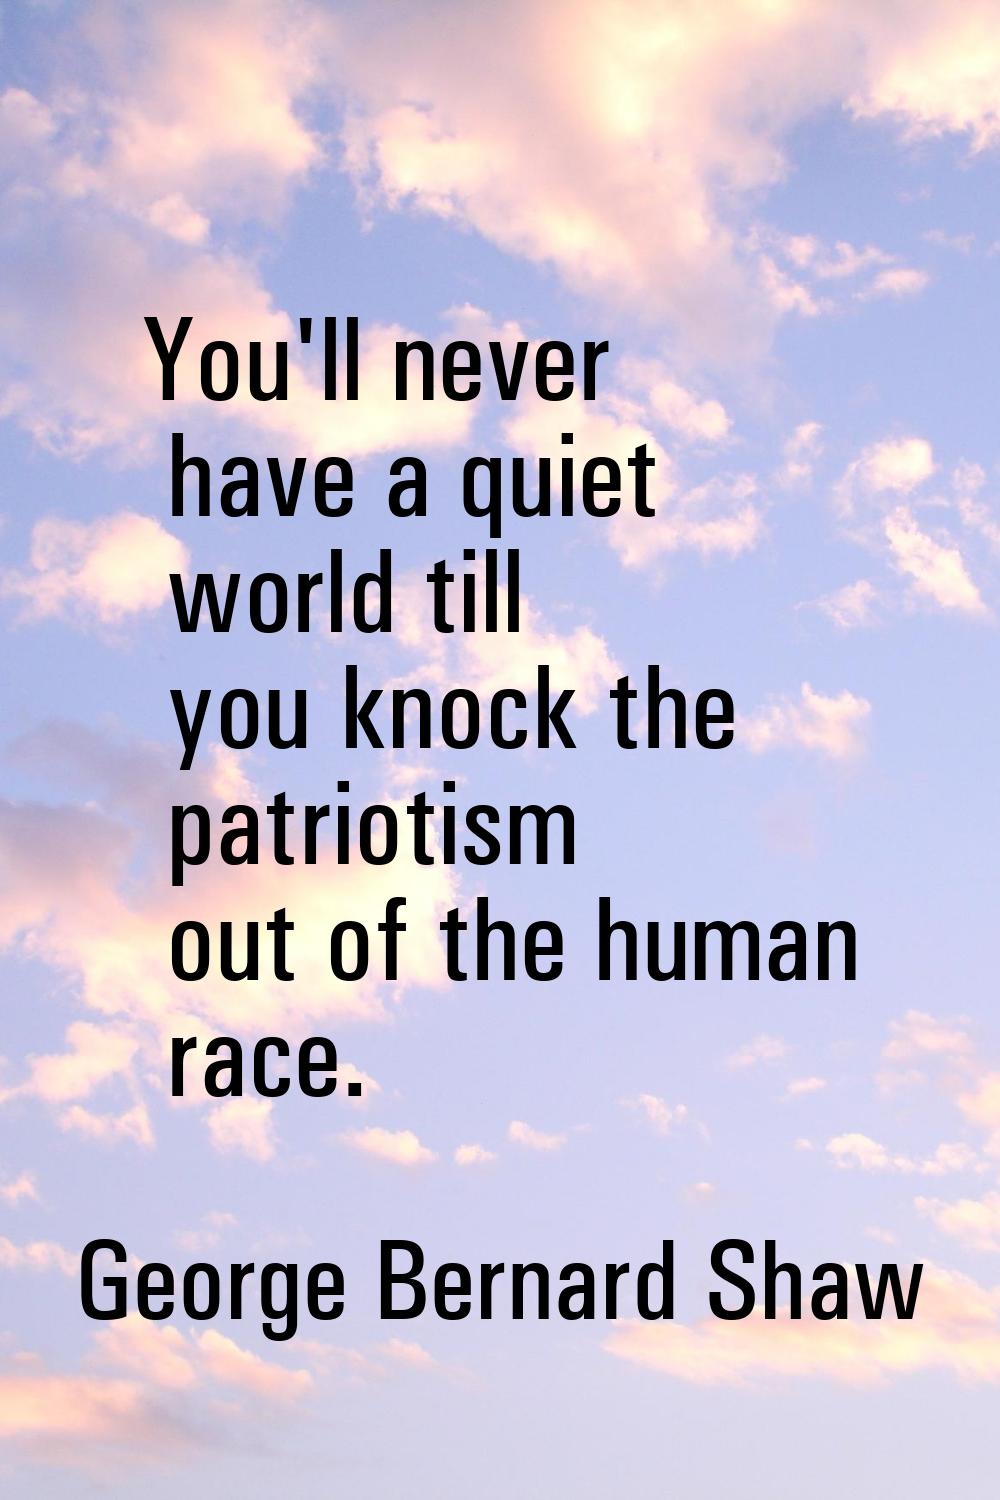 You'll never have a quiet world till you knock the patriotism out of the human race.